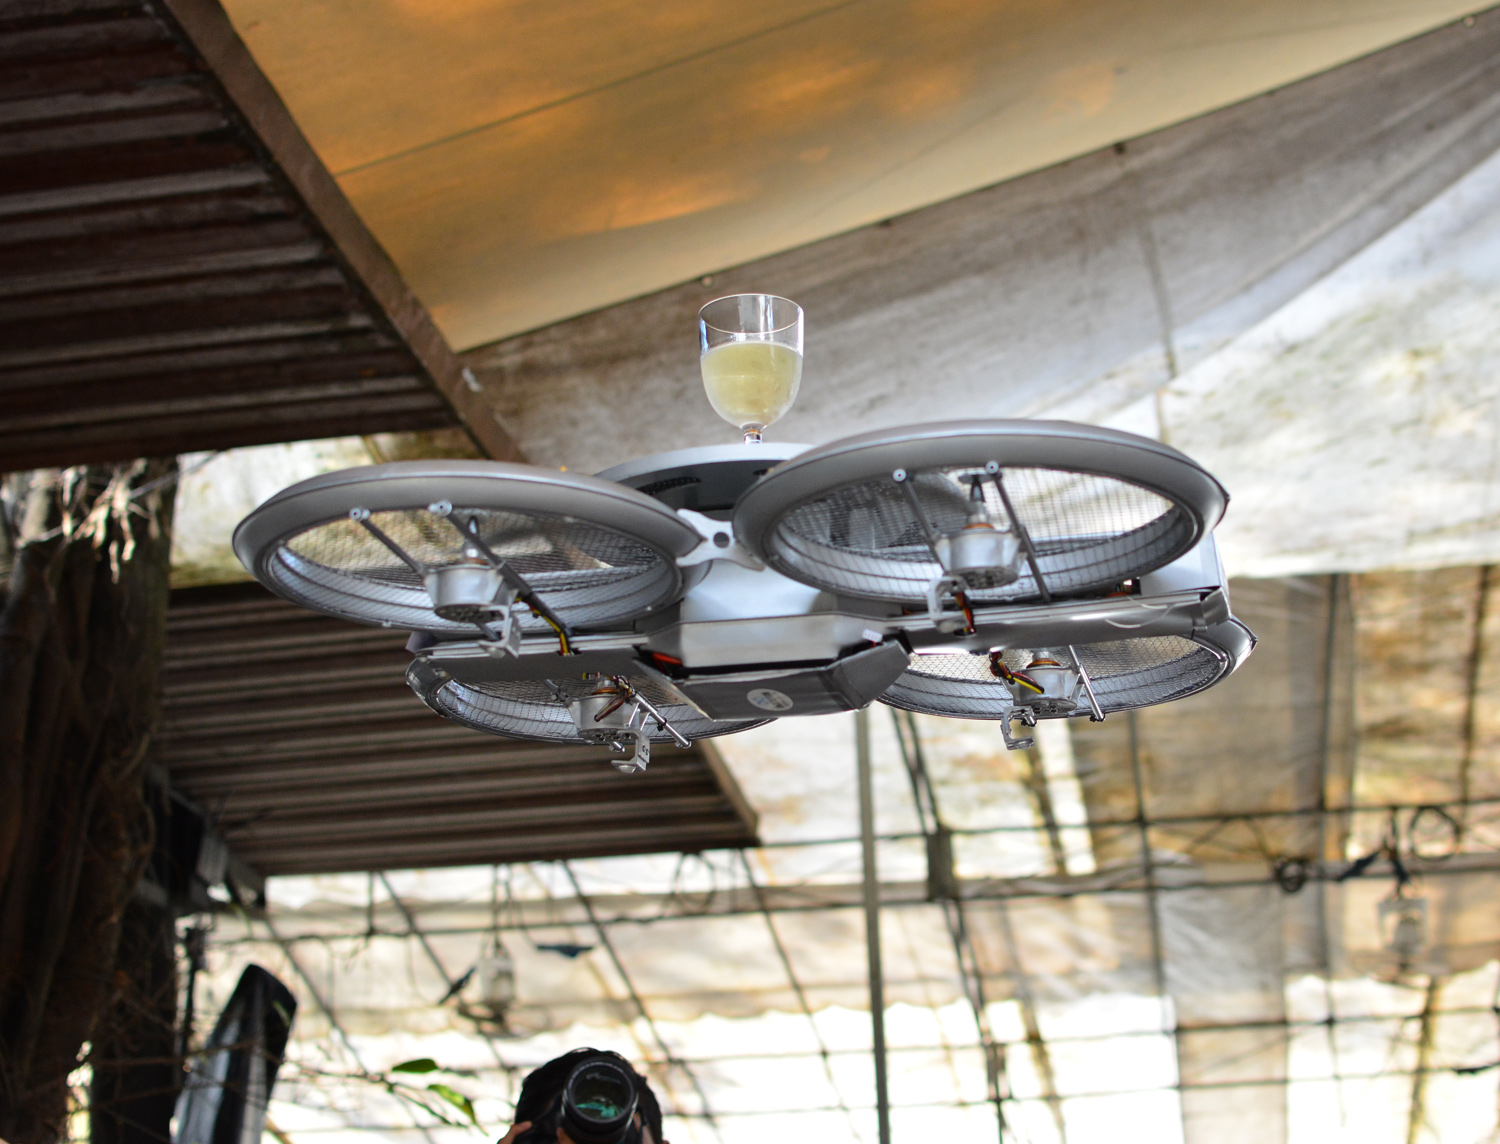 drone-waiters-deliver-food-drink-singapore.jpg